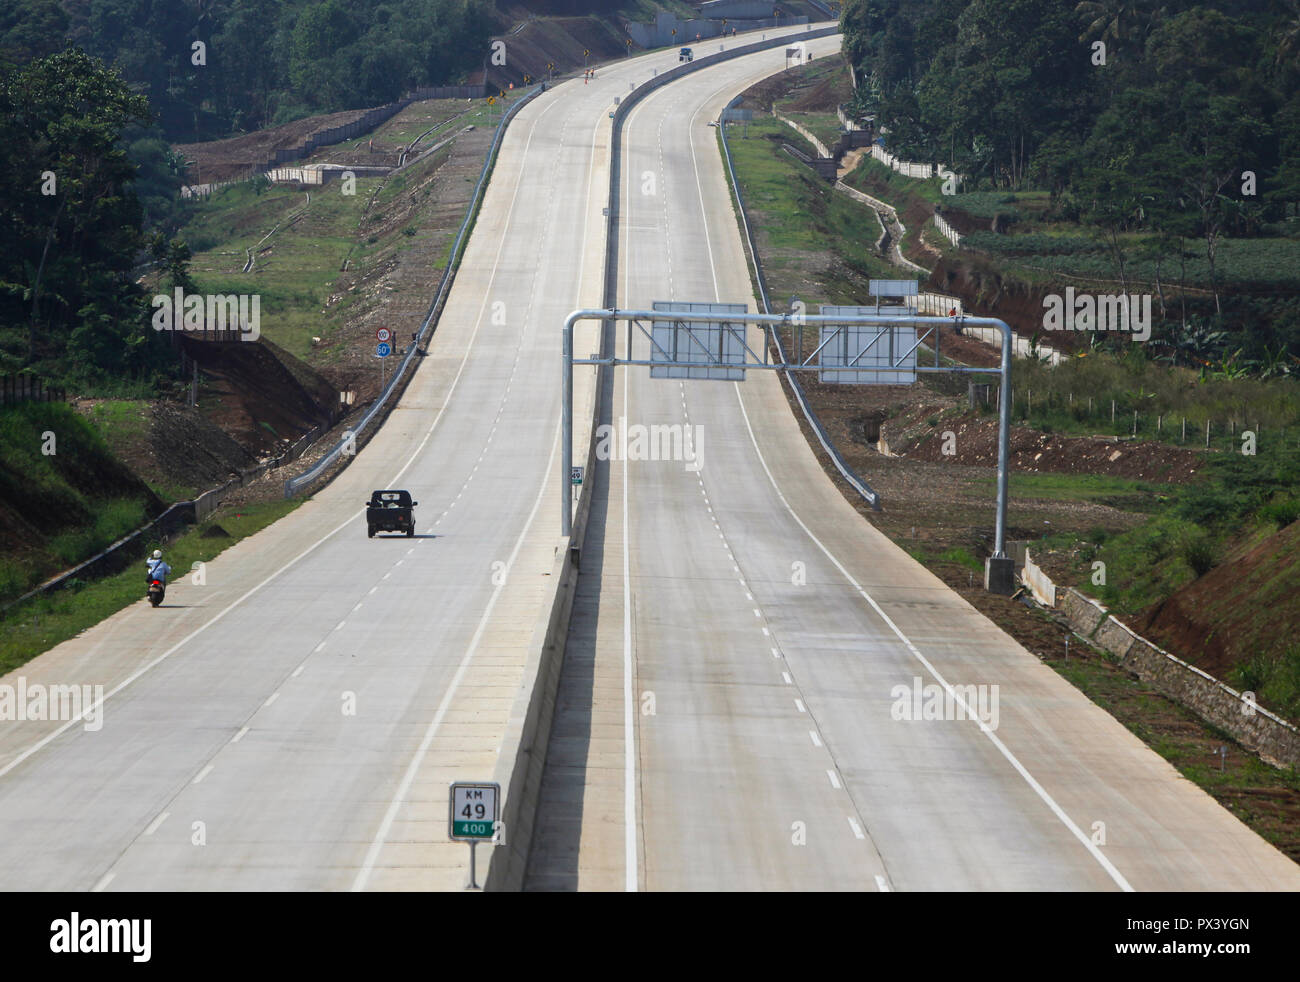 Vehicles pass on section I of Bogor-Ciawi-Sukabumi (Bocimi) Toll Road which is not yet operational. The section I of Bogor-Ciawi-Sukabumi (Bocimi) section I which connects Ciawi to Cigombong along 15.35 kilometers (km) will soon be operational this month. This 54 km toll road has a long history, from stalling, to mutually investor since 1997. Stock Photo